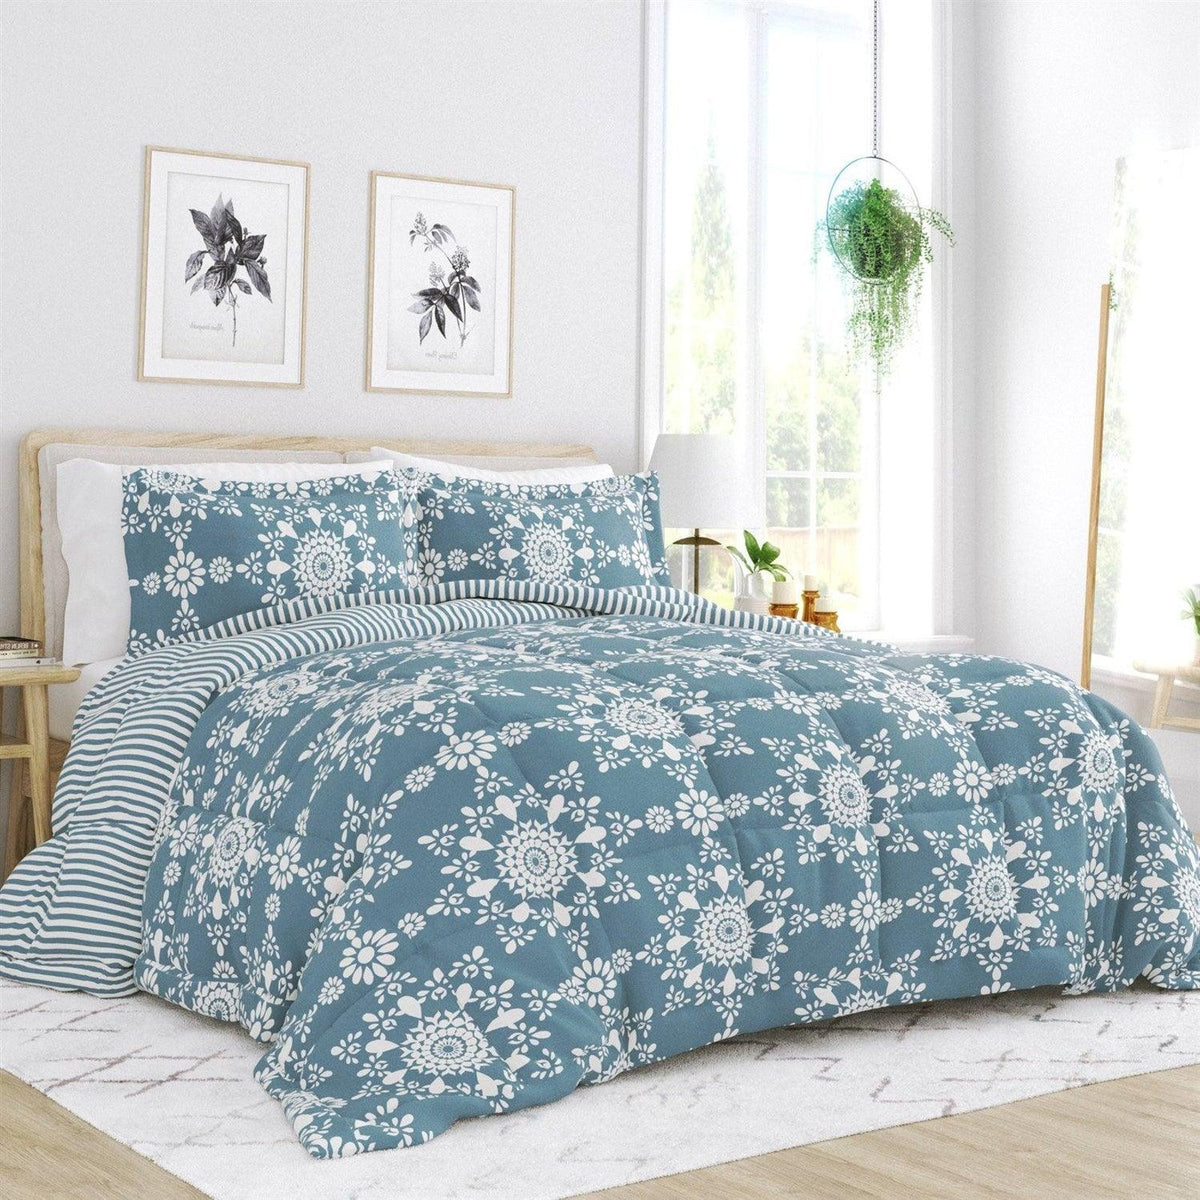 Full/Queen size 3-Piece Blue and White Reversible Floral Striped Comforter Set